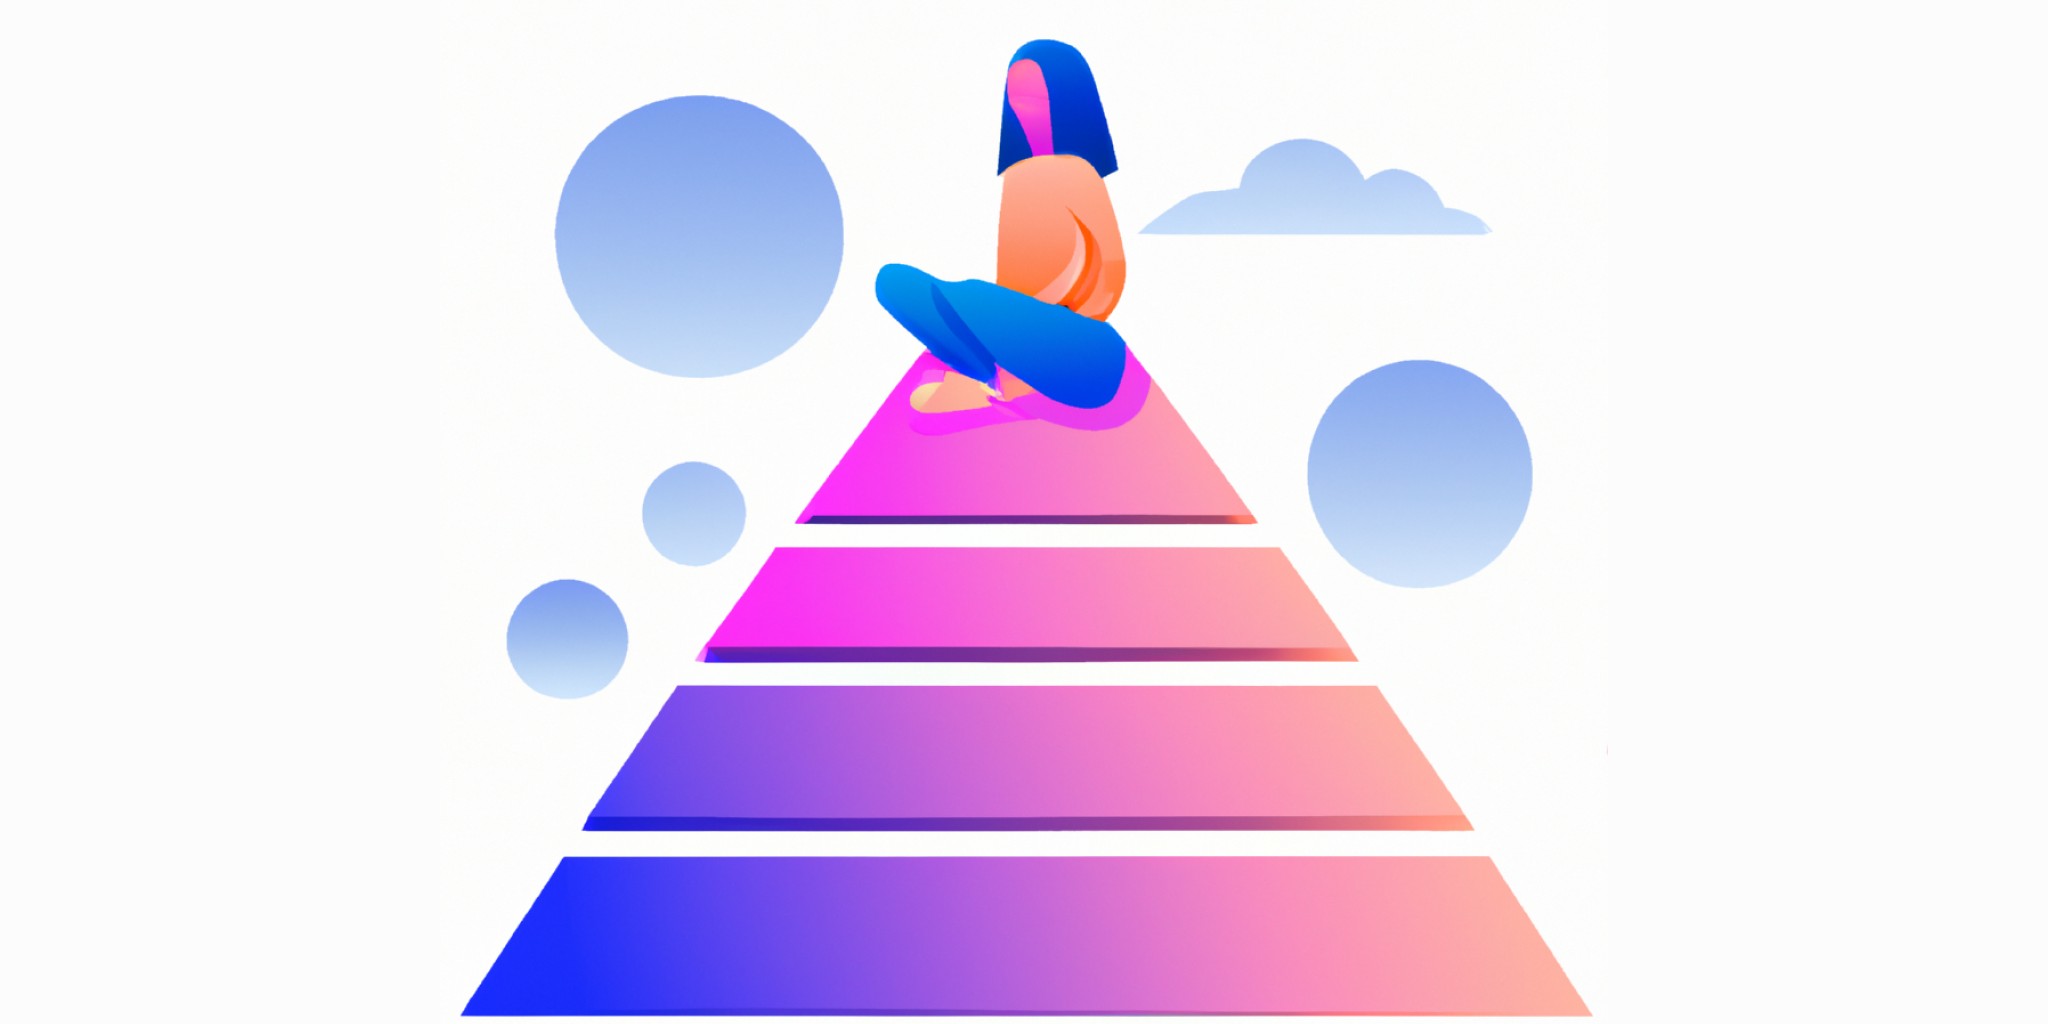 pyramid with a person sitting on the top in flat illustration style with gradients and white background